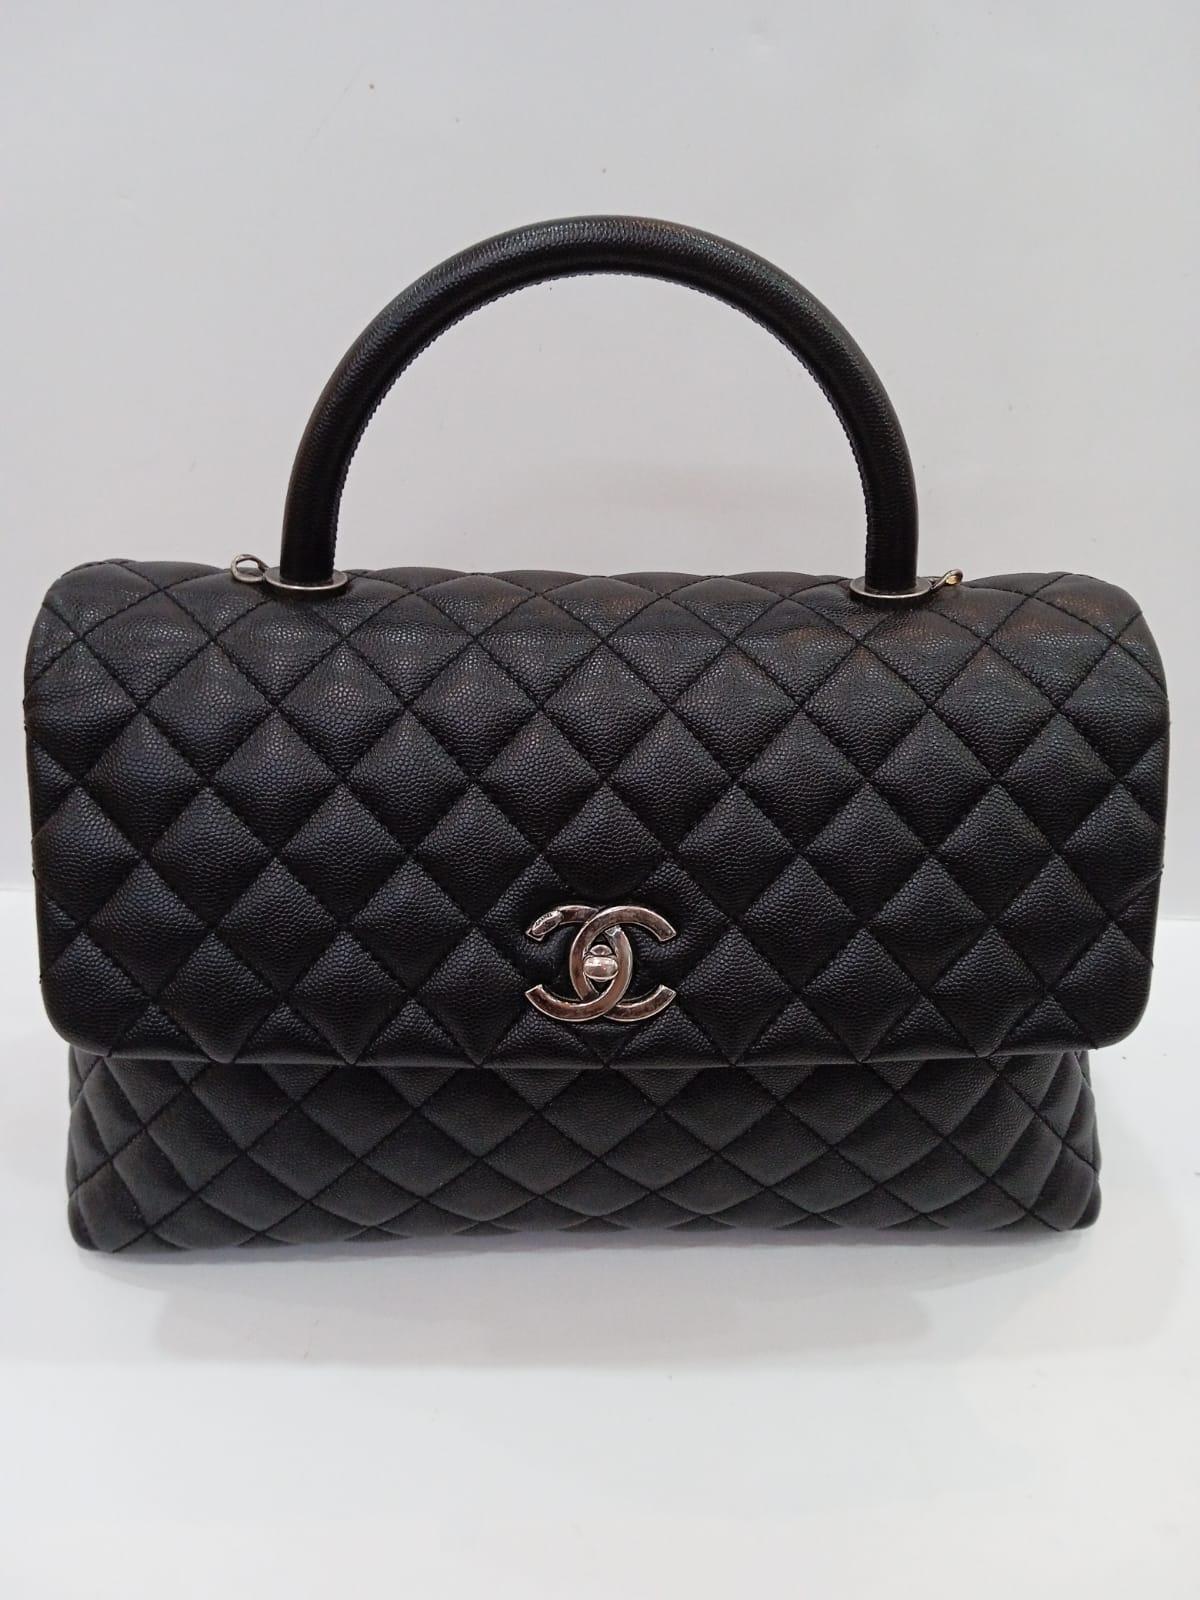 Chanel Black Caviar Quilted Large Coco Handle SHW Bag 10